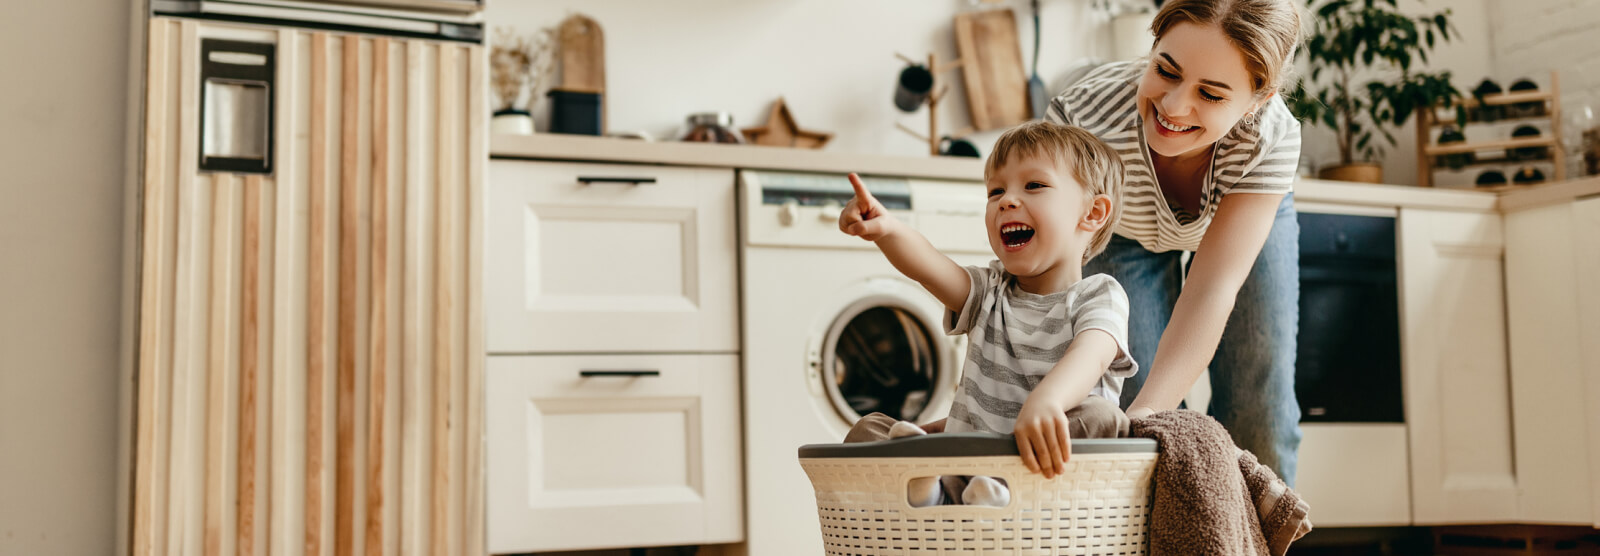 Young mom and toddler playing in a laundry basket